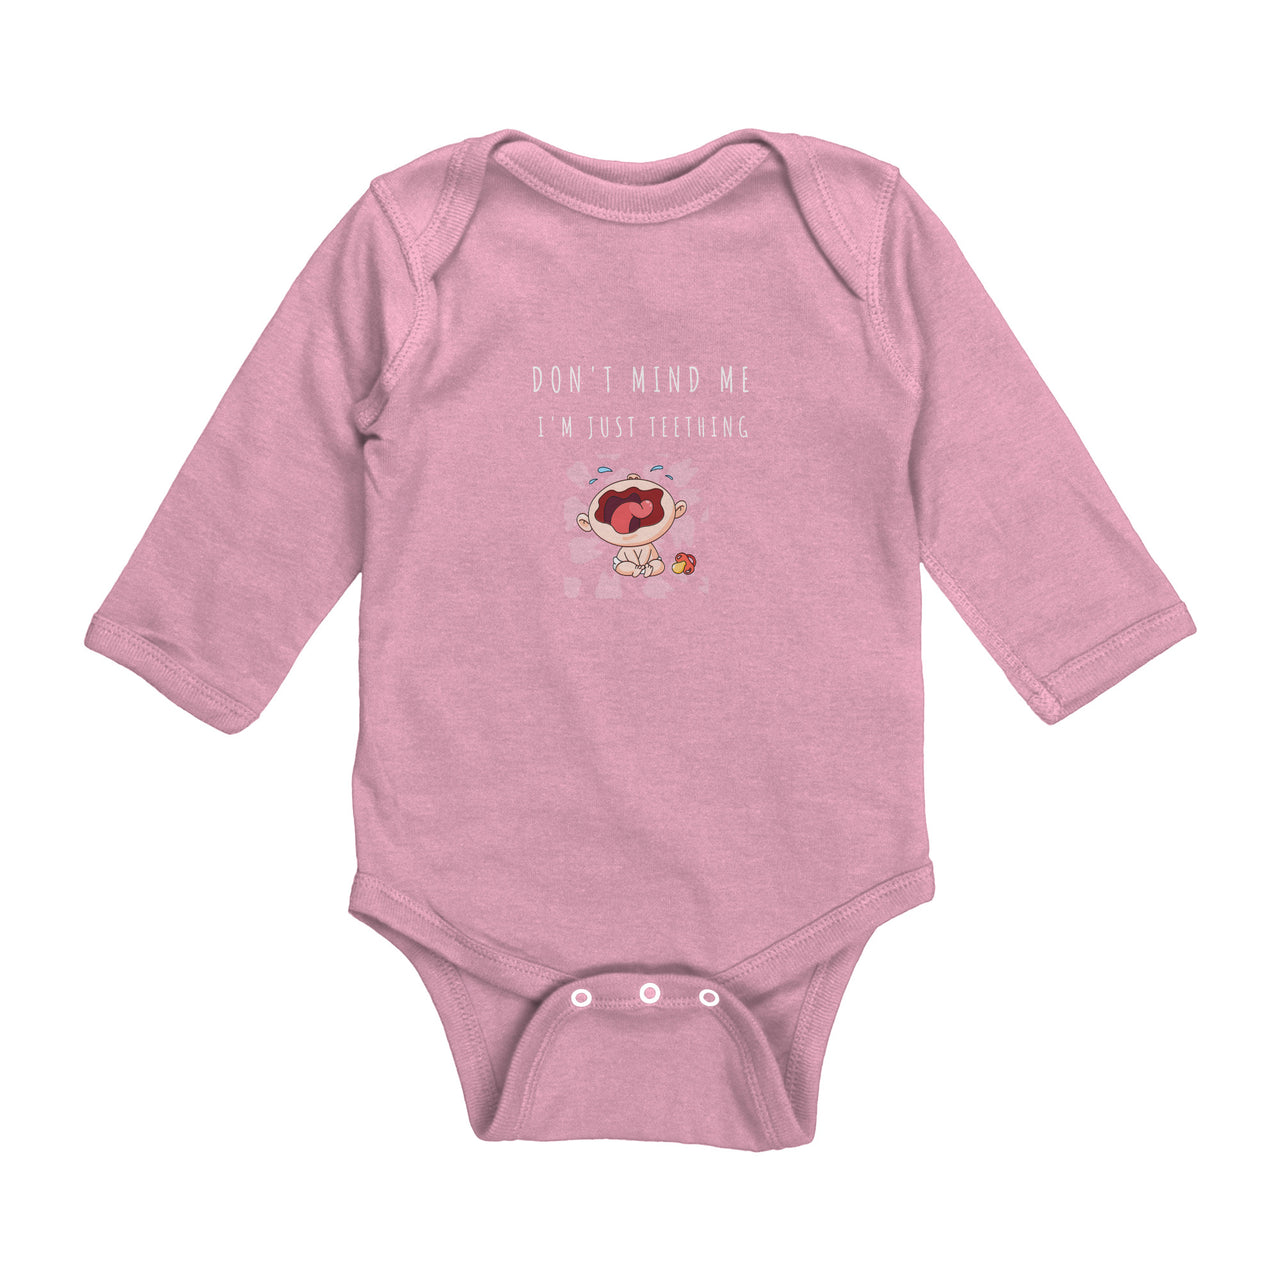 Don't Mind Me - I'm Just Teething - Long Sleeve Onesie - DC - Colored Image